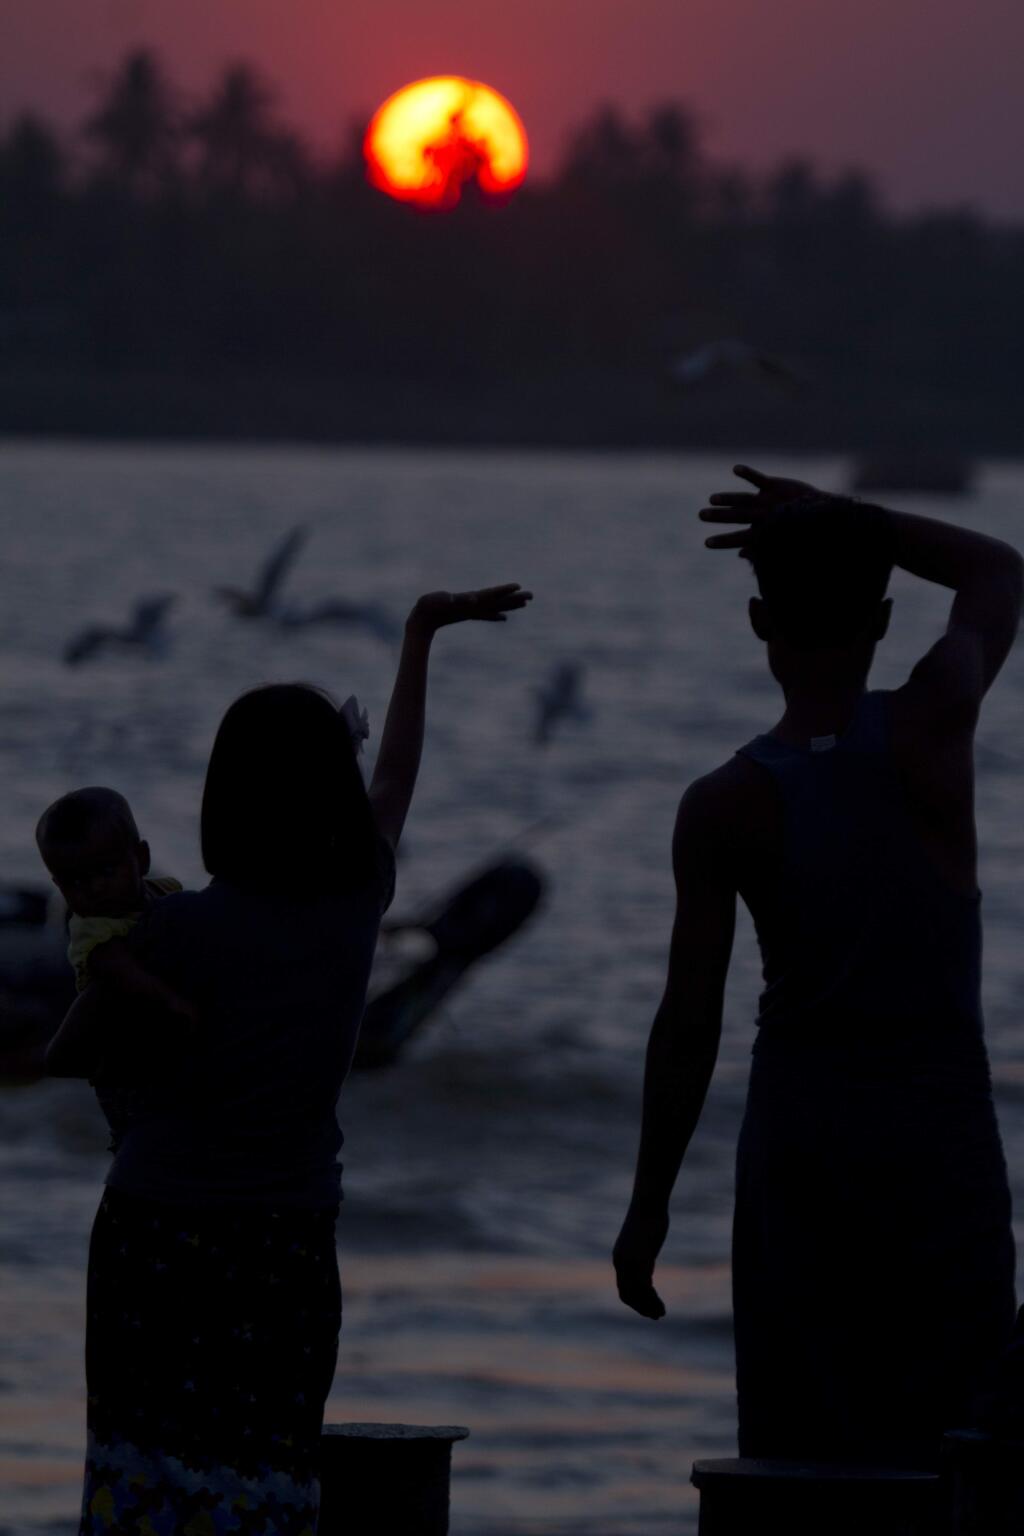 A couple with their child waves during the last sunset of the year at a jetty at Yangon river in Yangon, Myanmar Wednesday, Dec. 31, 2014. (AP Photo/Khin Maung Win)